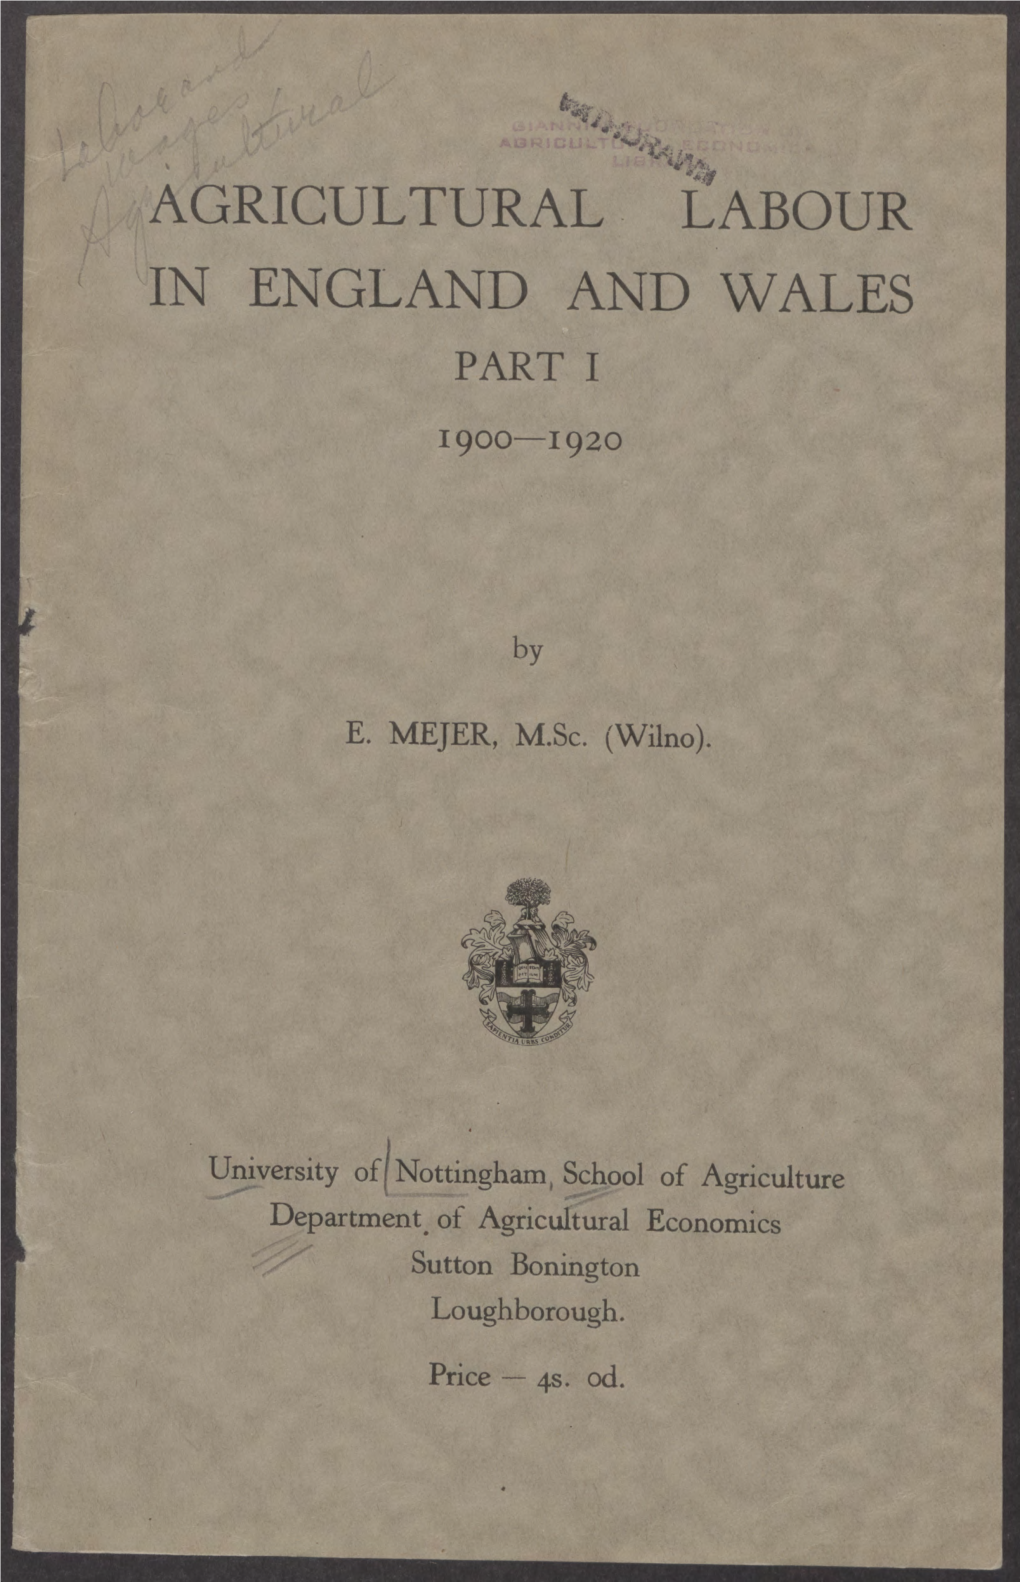 Agricultural Labour in England and Wales Part I, 1900-1920